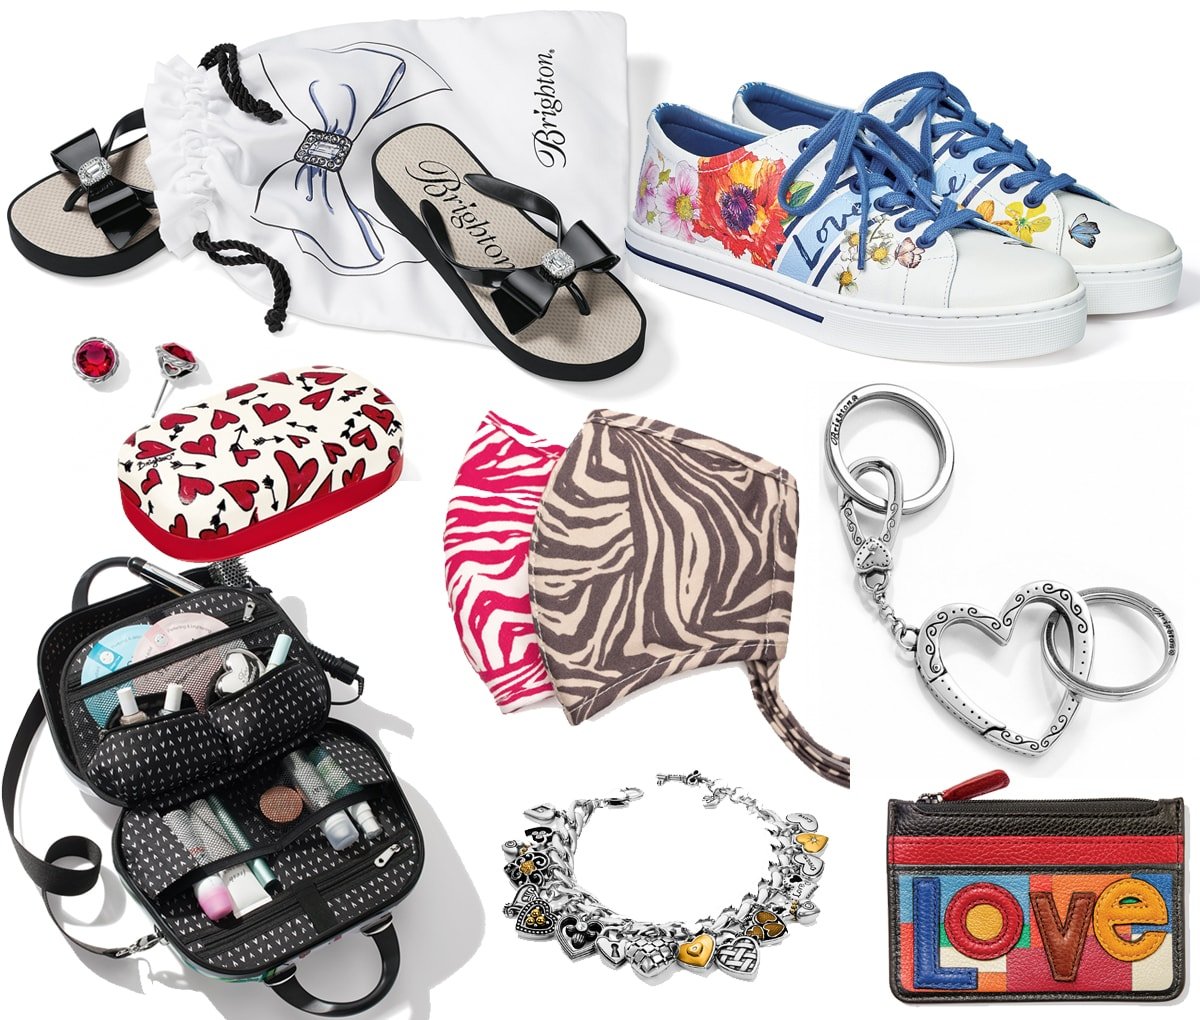 Brighton also offers footwear, coin purses, cosmetic cases, jewelry, face masks, and unique items like earring boxes and keyfobs